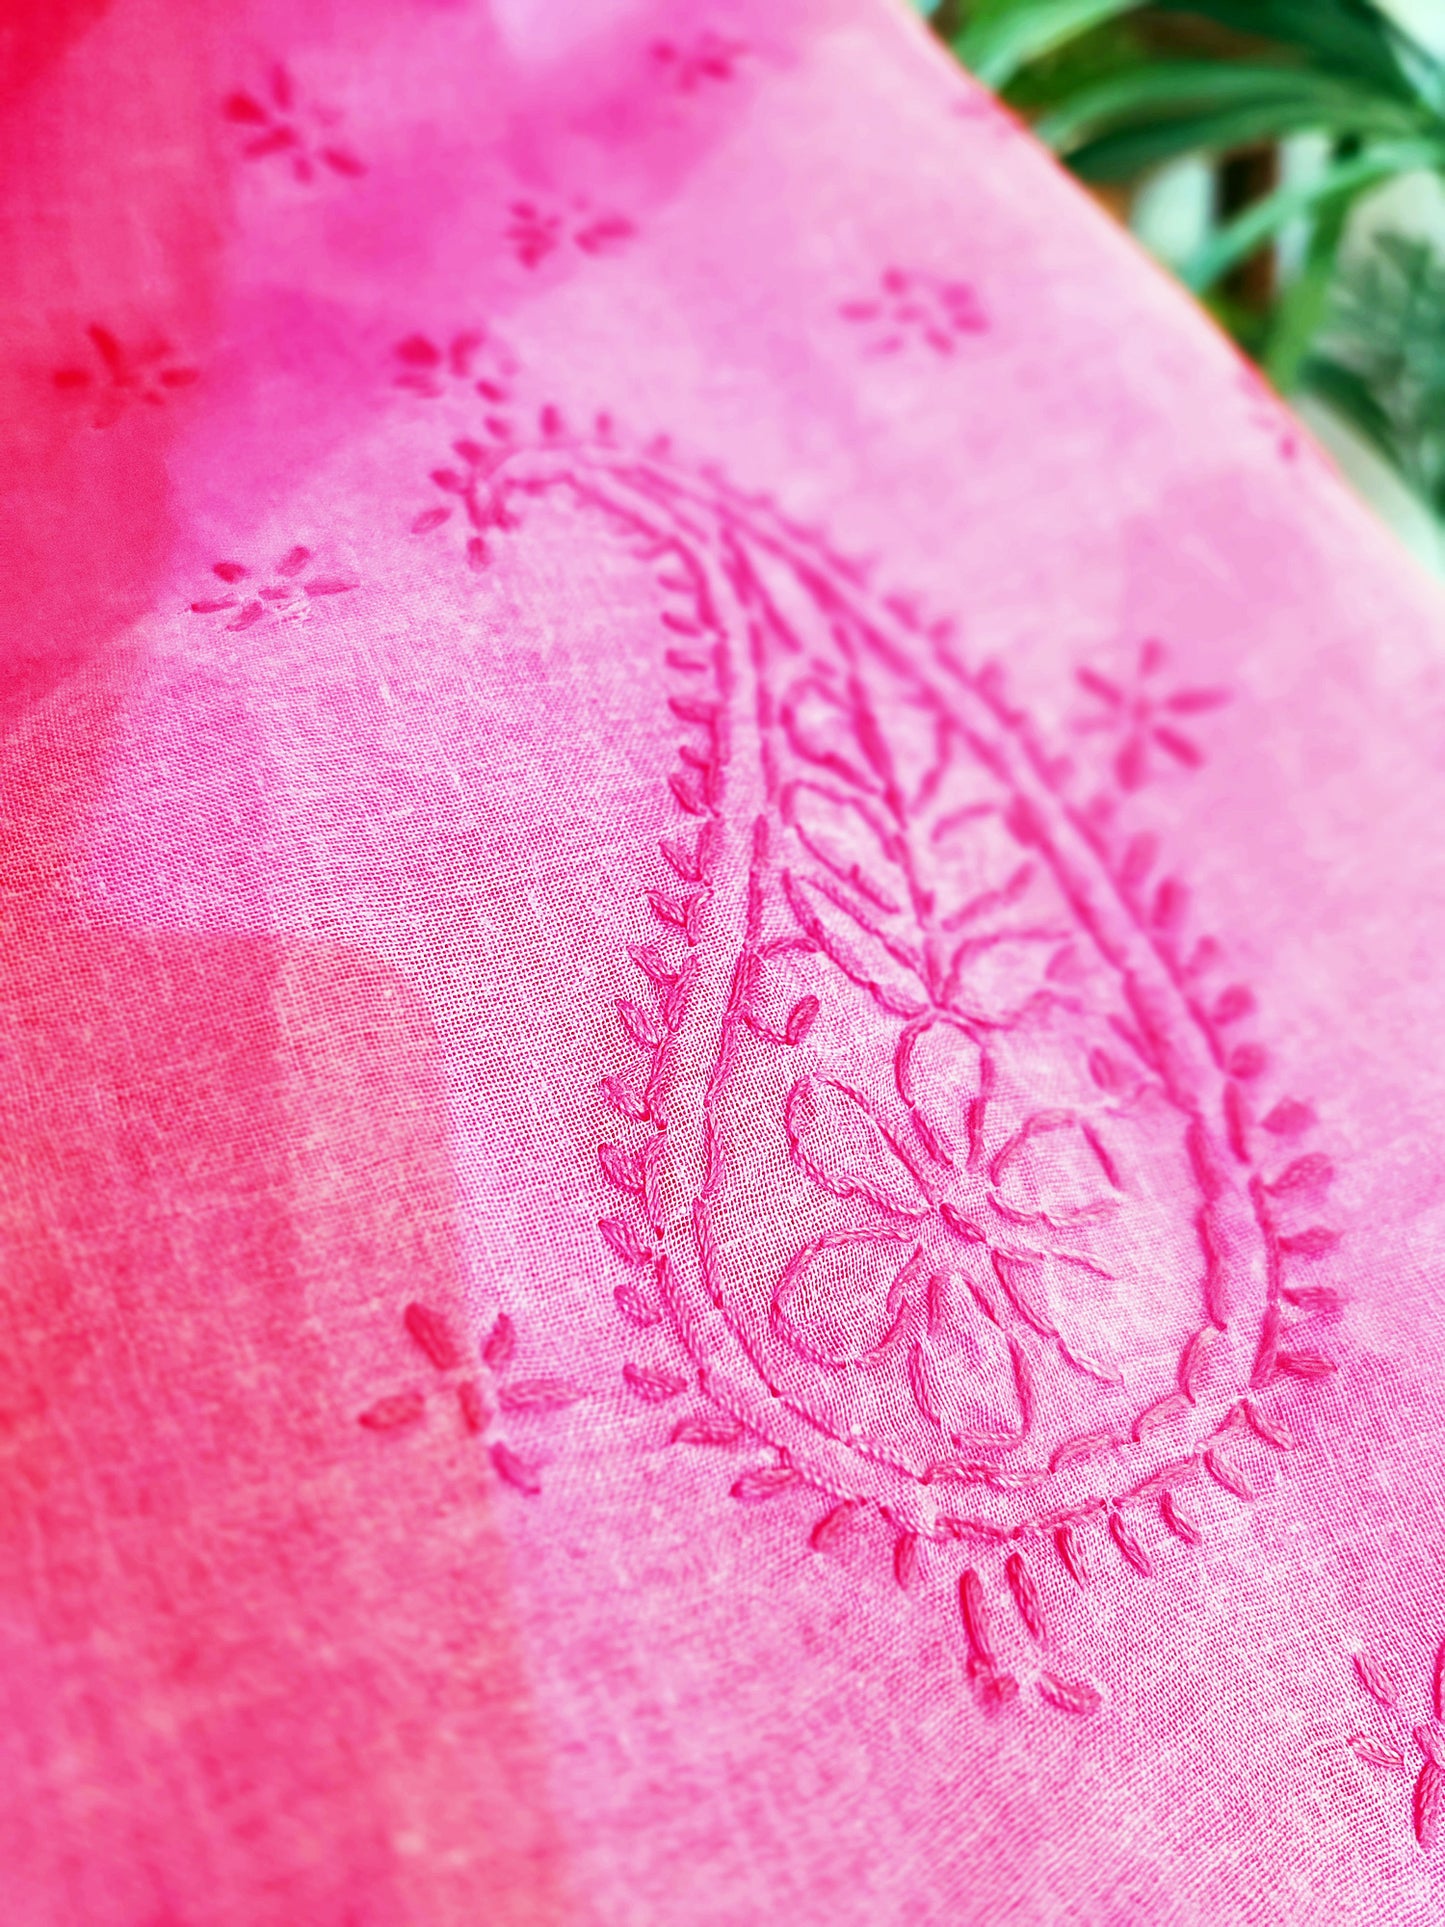 Magenta Pink Cotton Voile Saree With Lucknowi Handwork With Contrast Blouse